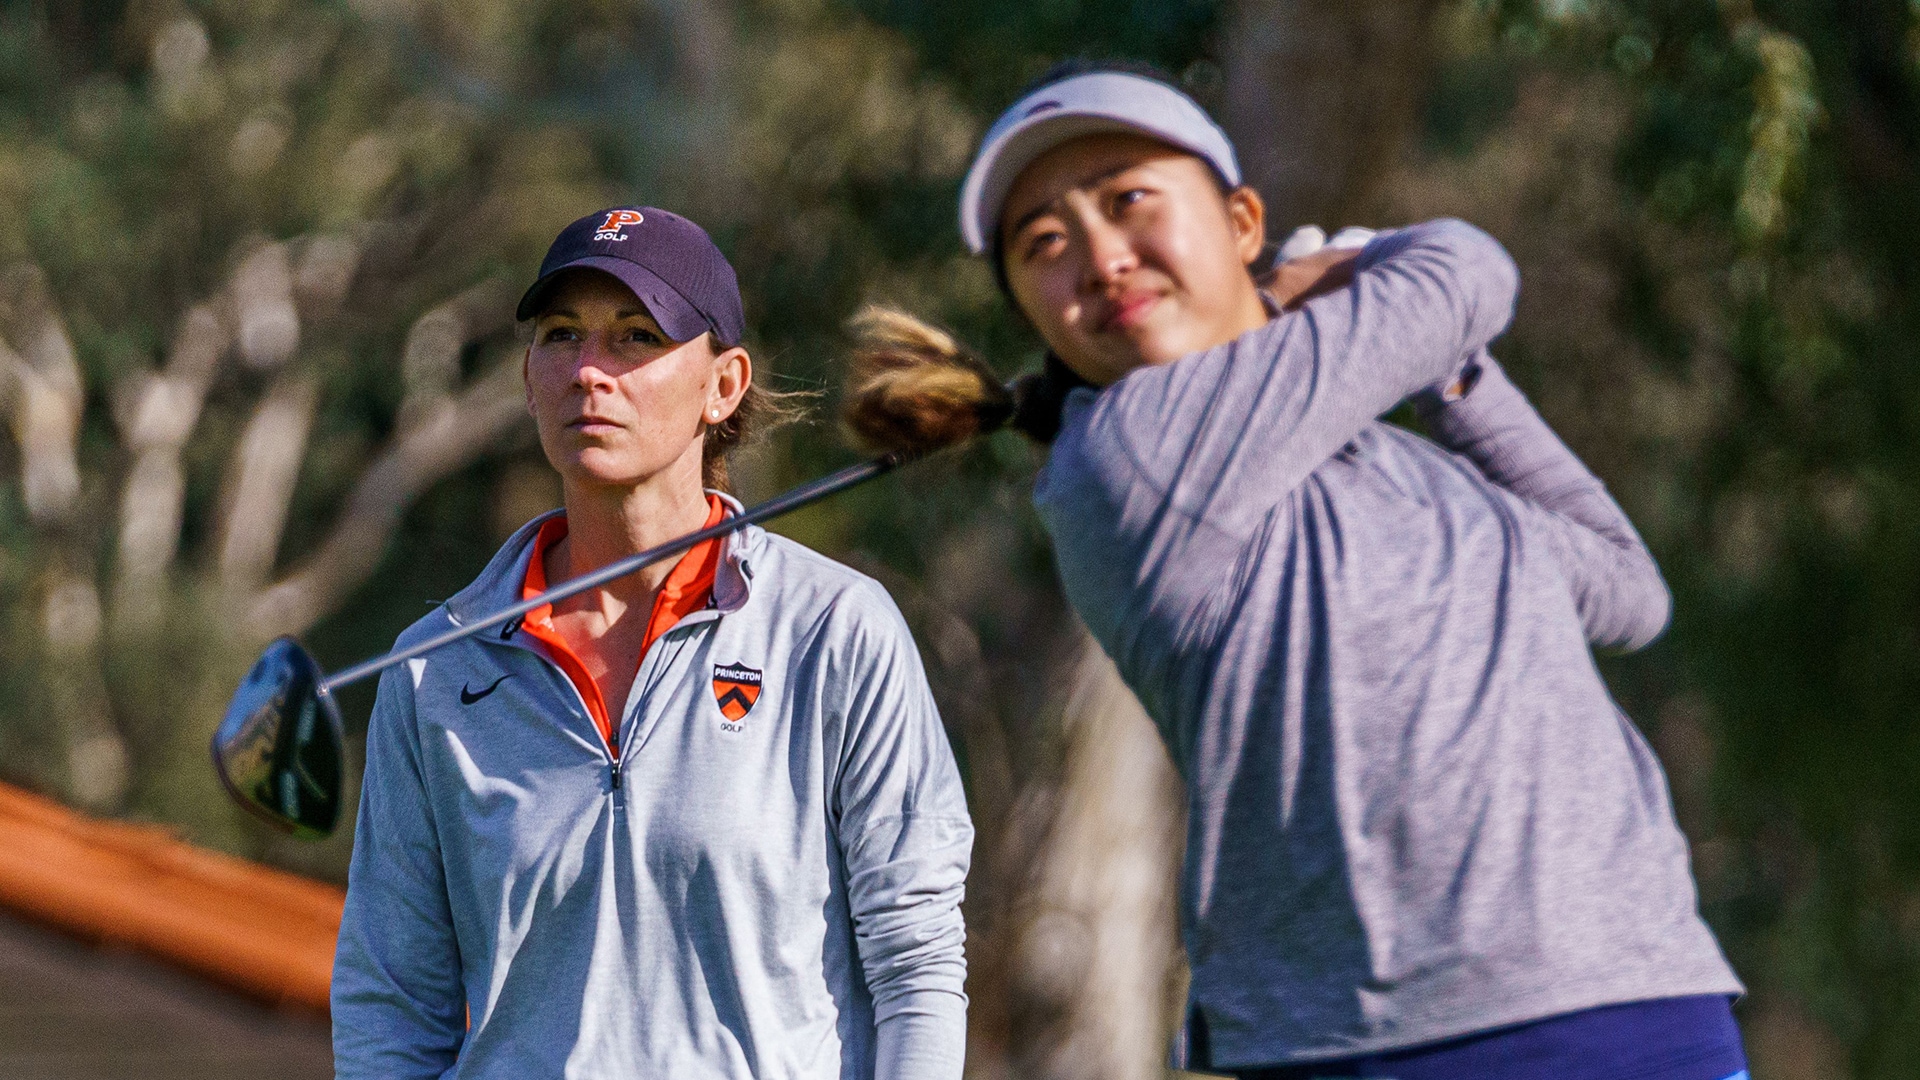 As college golf recruiting evolves, camps take on added value – even for elites